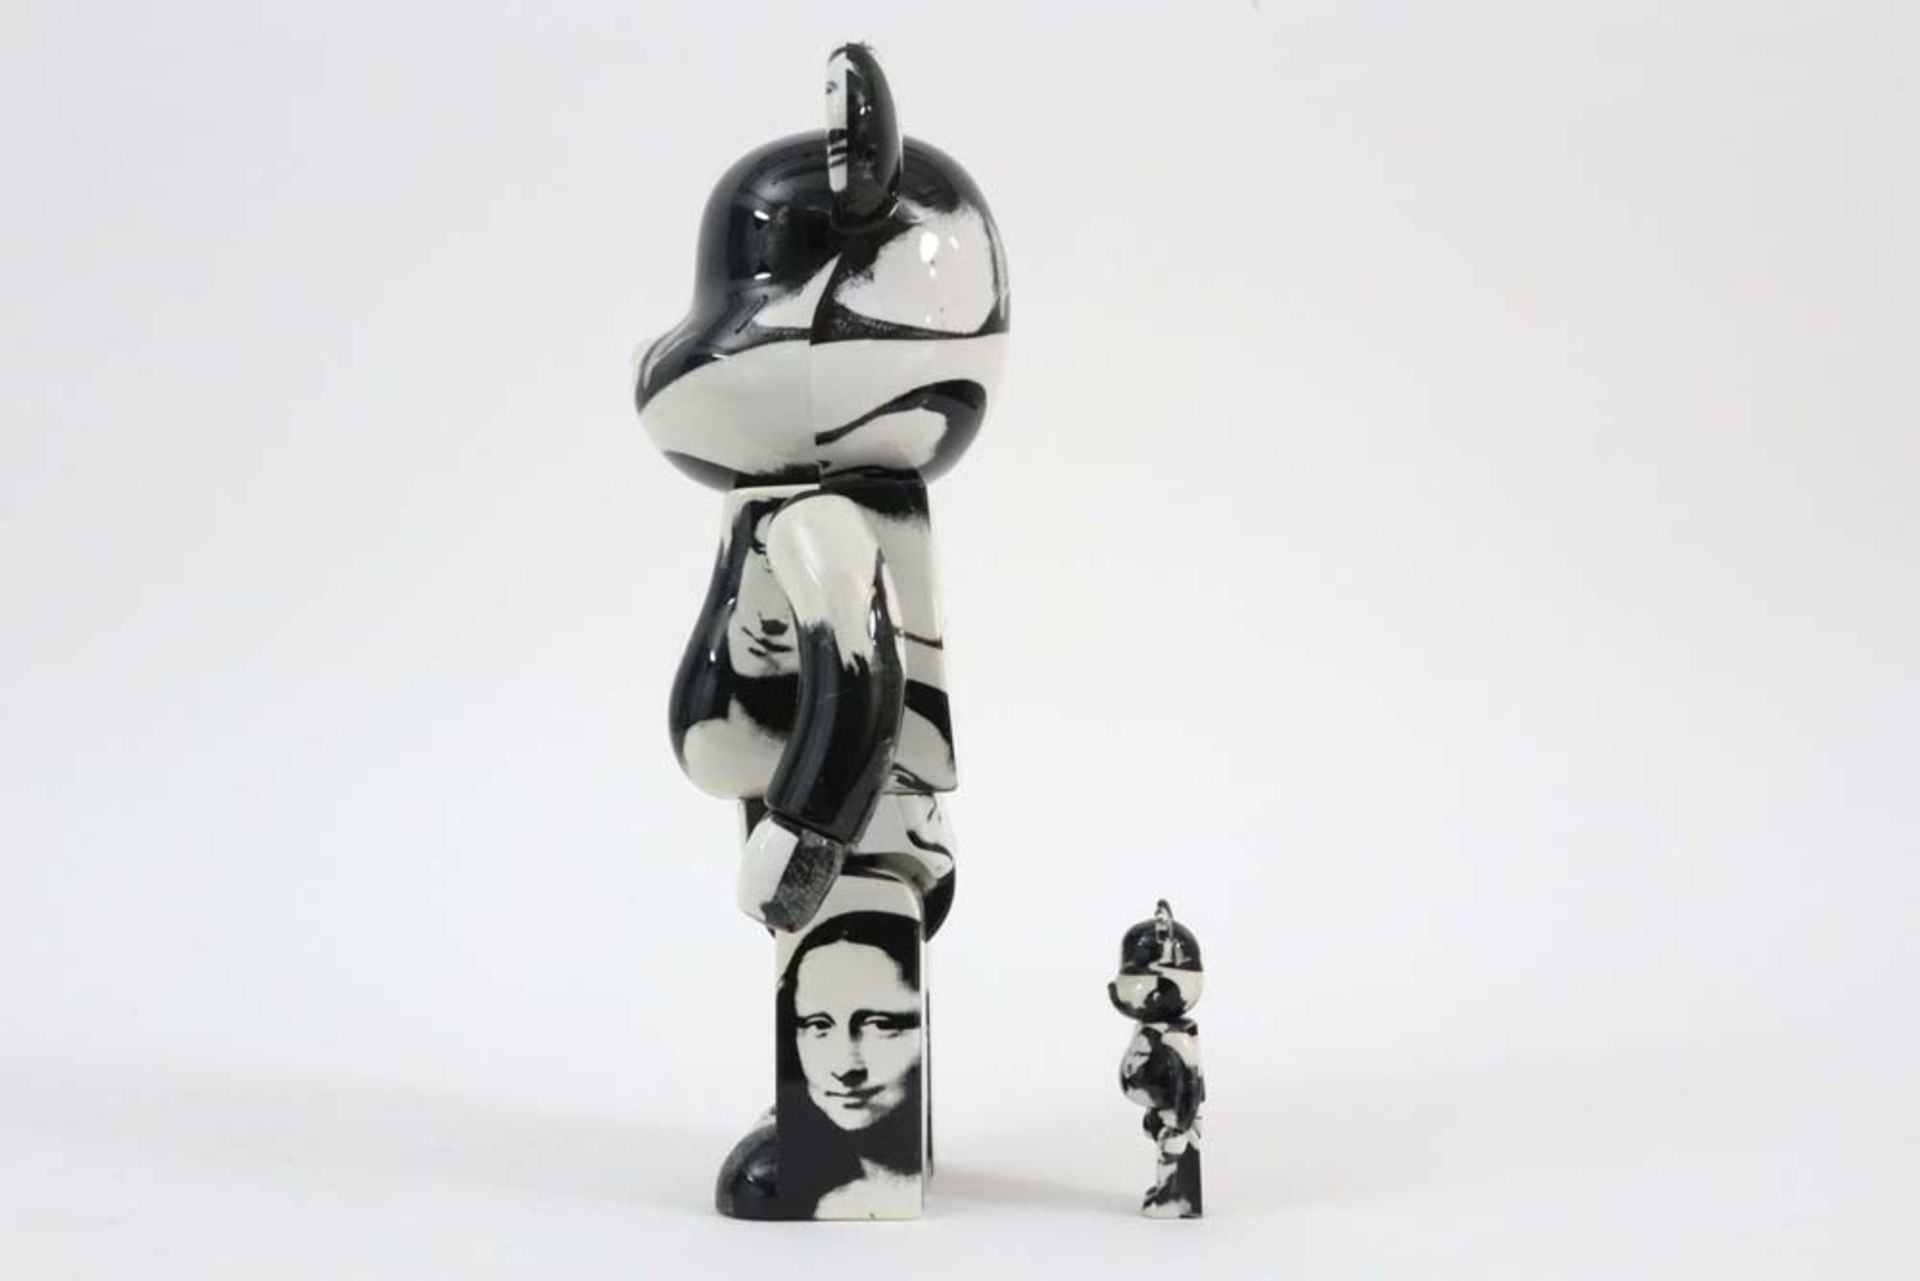 Bearbrick set of small and bigger sculpture after the double Mona Lisa" print by Andy Warhol - - Image 3 of 6